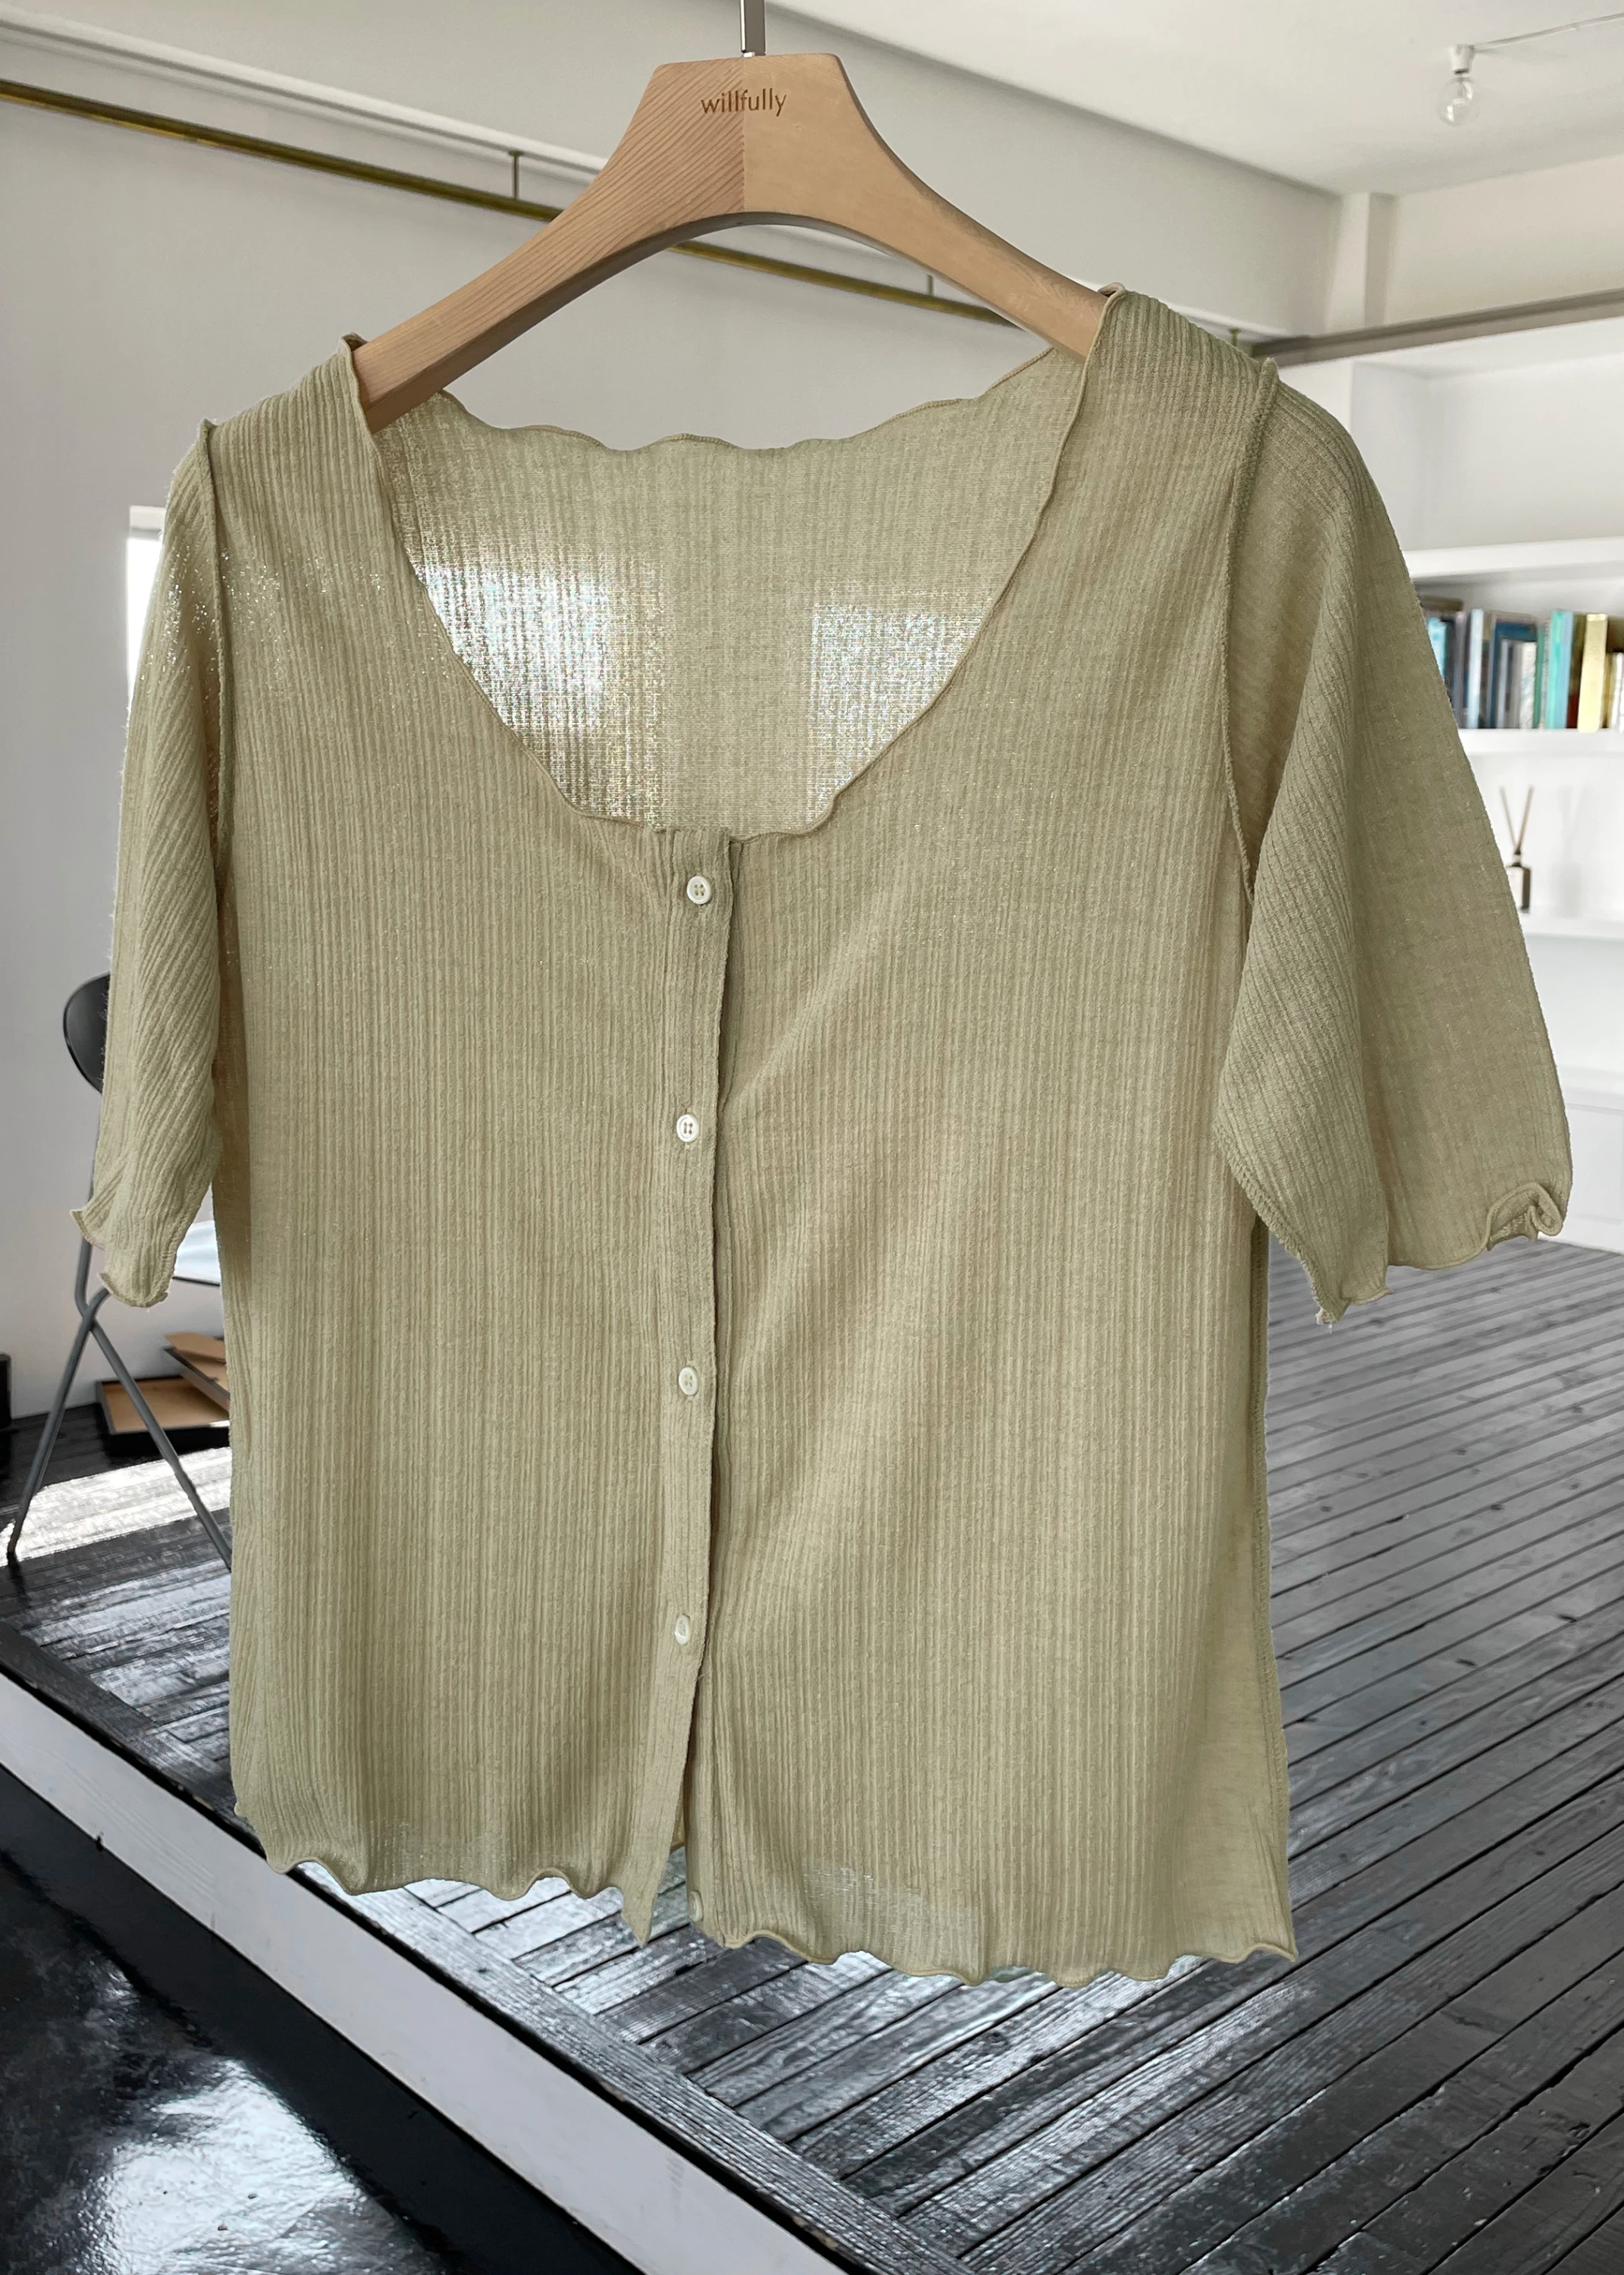 design teleco 3way sheer tops / willfully（ウィルフリー）のcut&sew ...